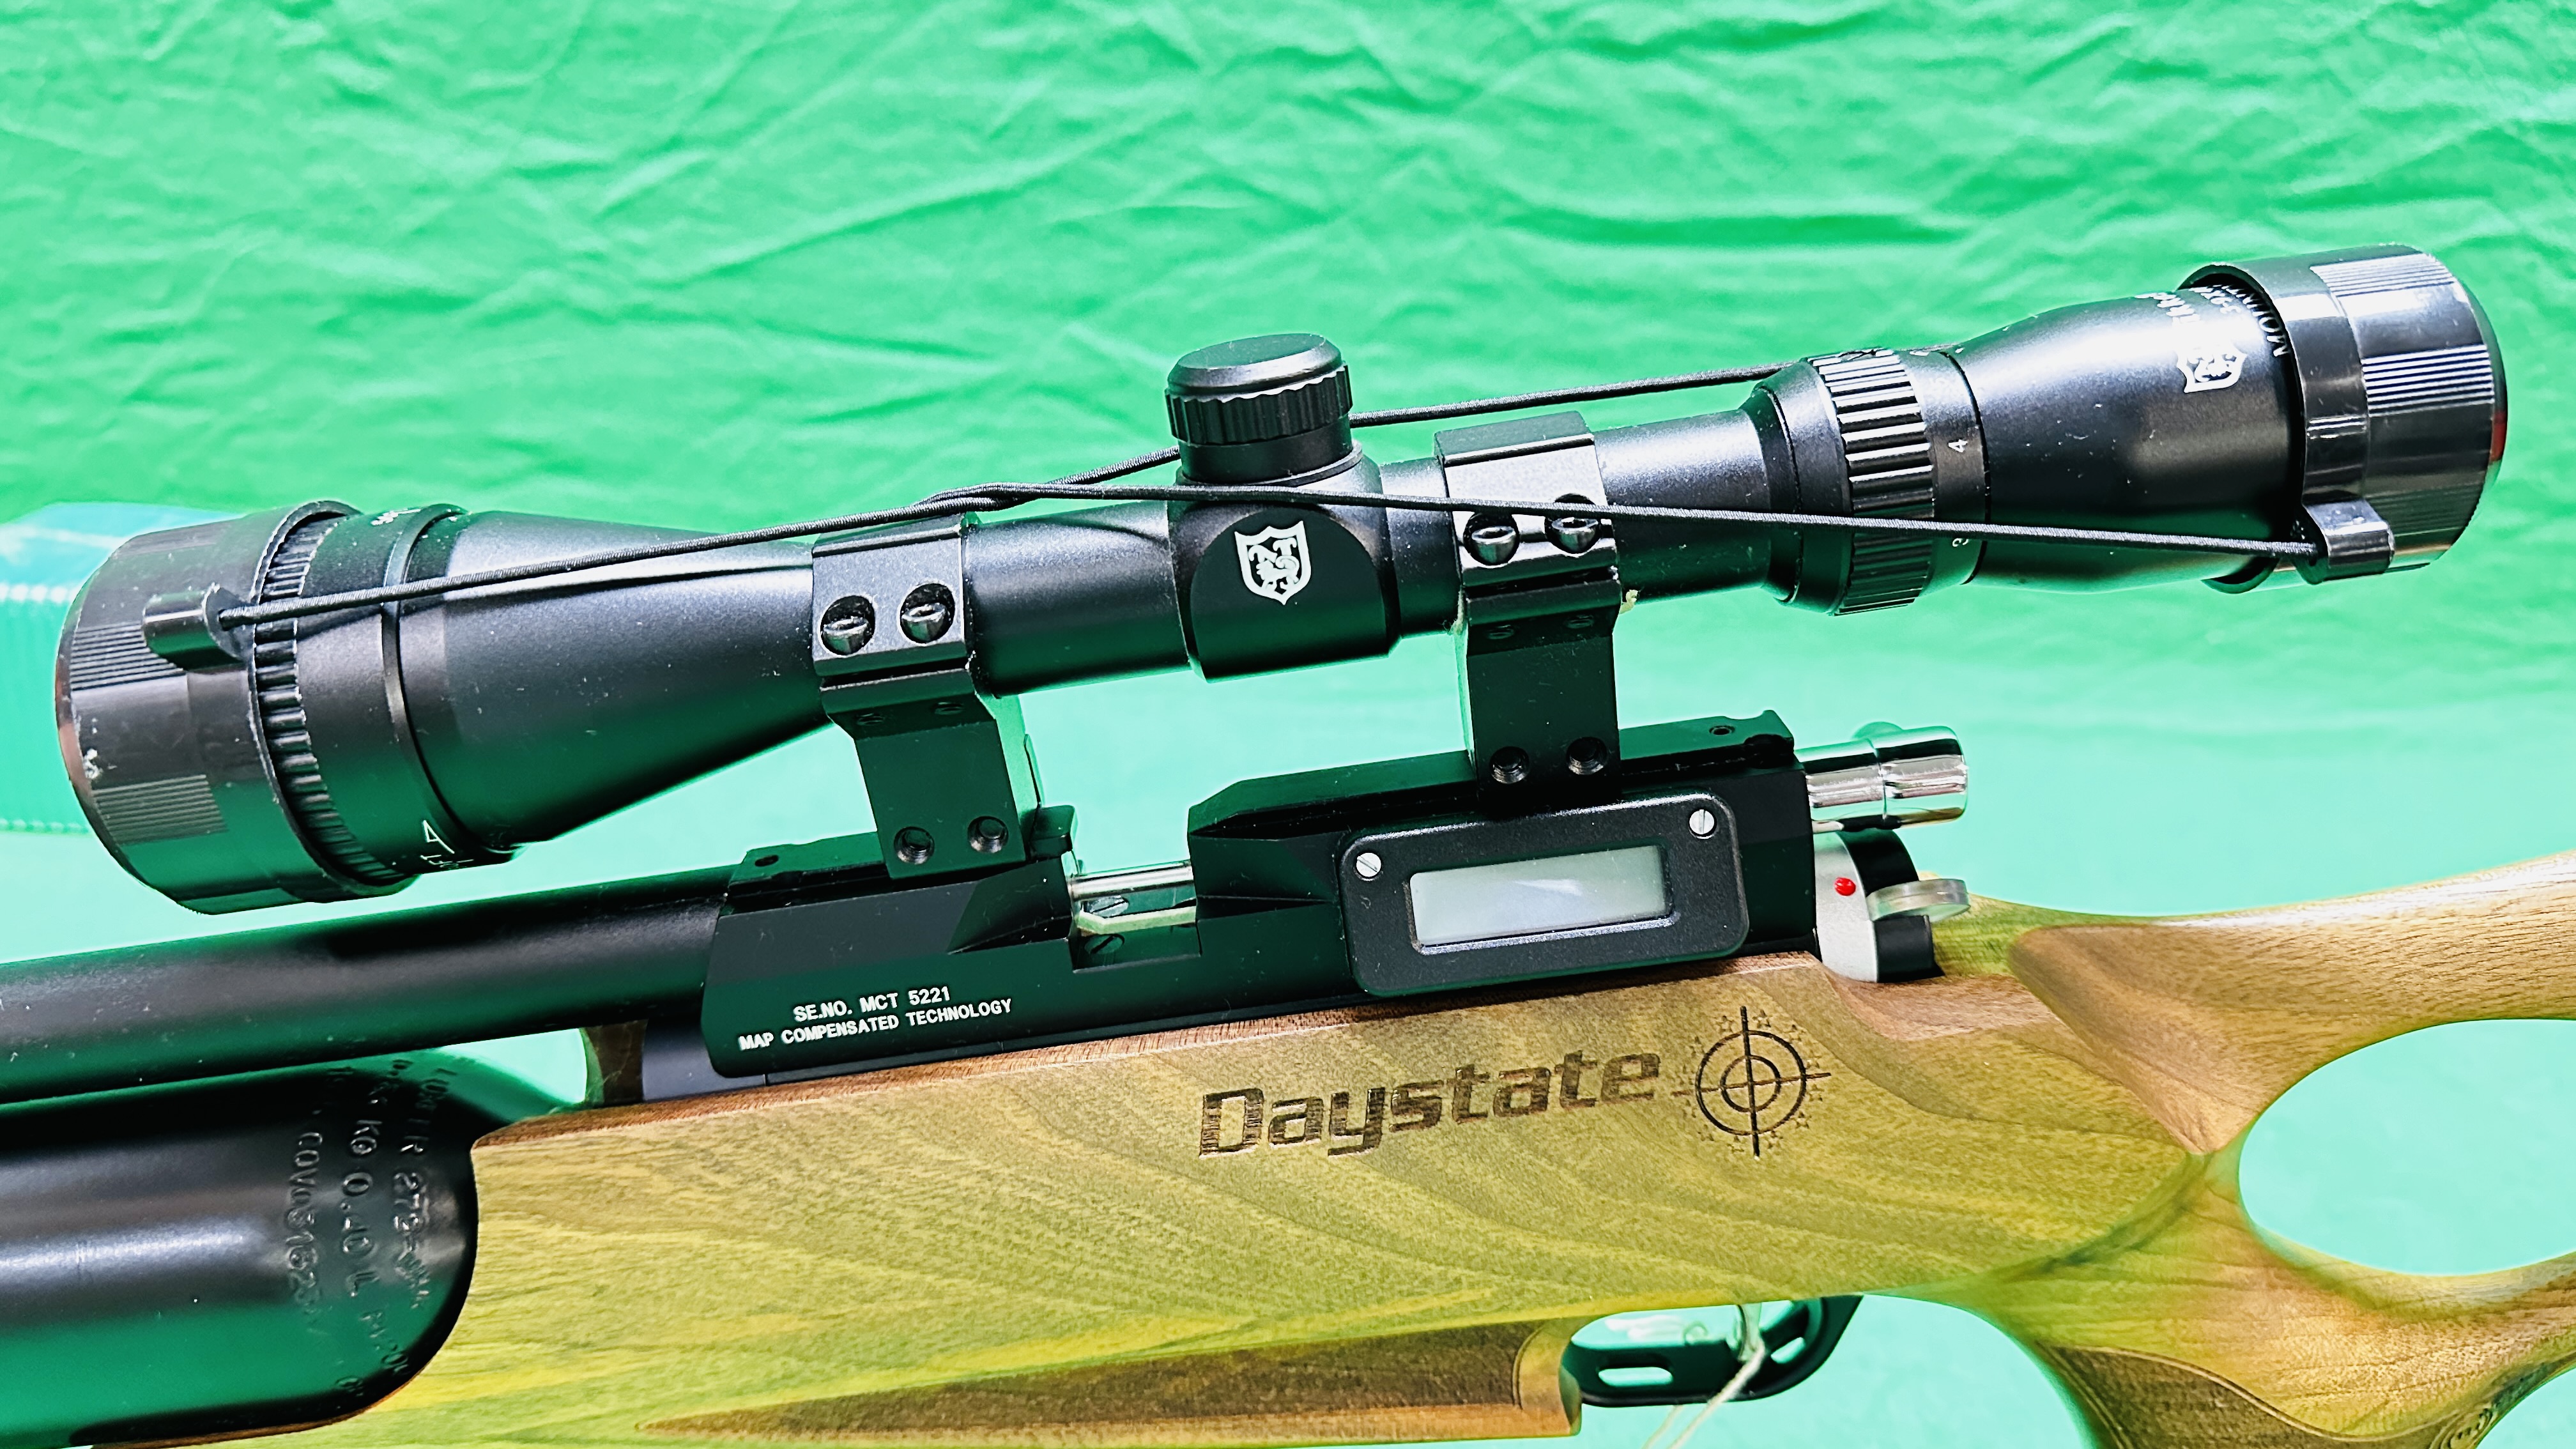 DAYSTATE AIRWOLF MCT DIGITAL PCP MULTI SHOT AIR RIFLE COMPLETE WITH 4 10 SHOT MAGAZINES, - Image 4 of 25